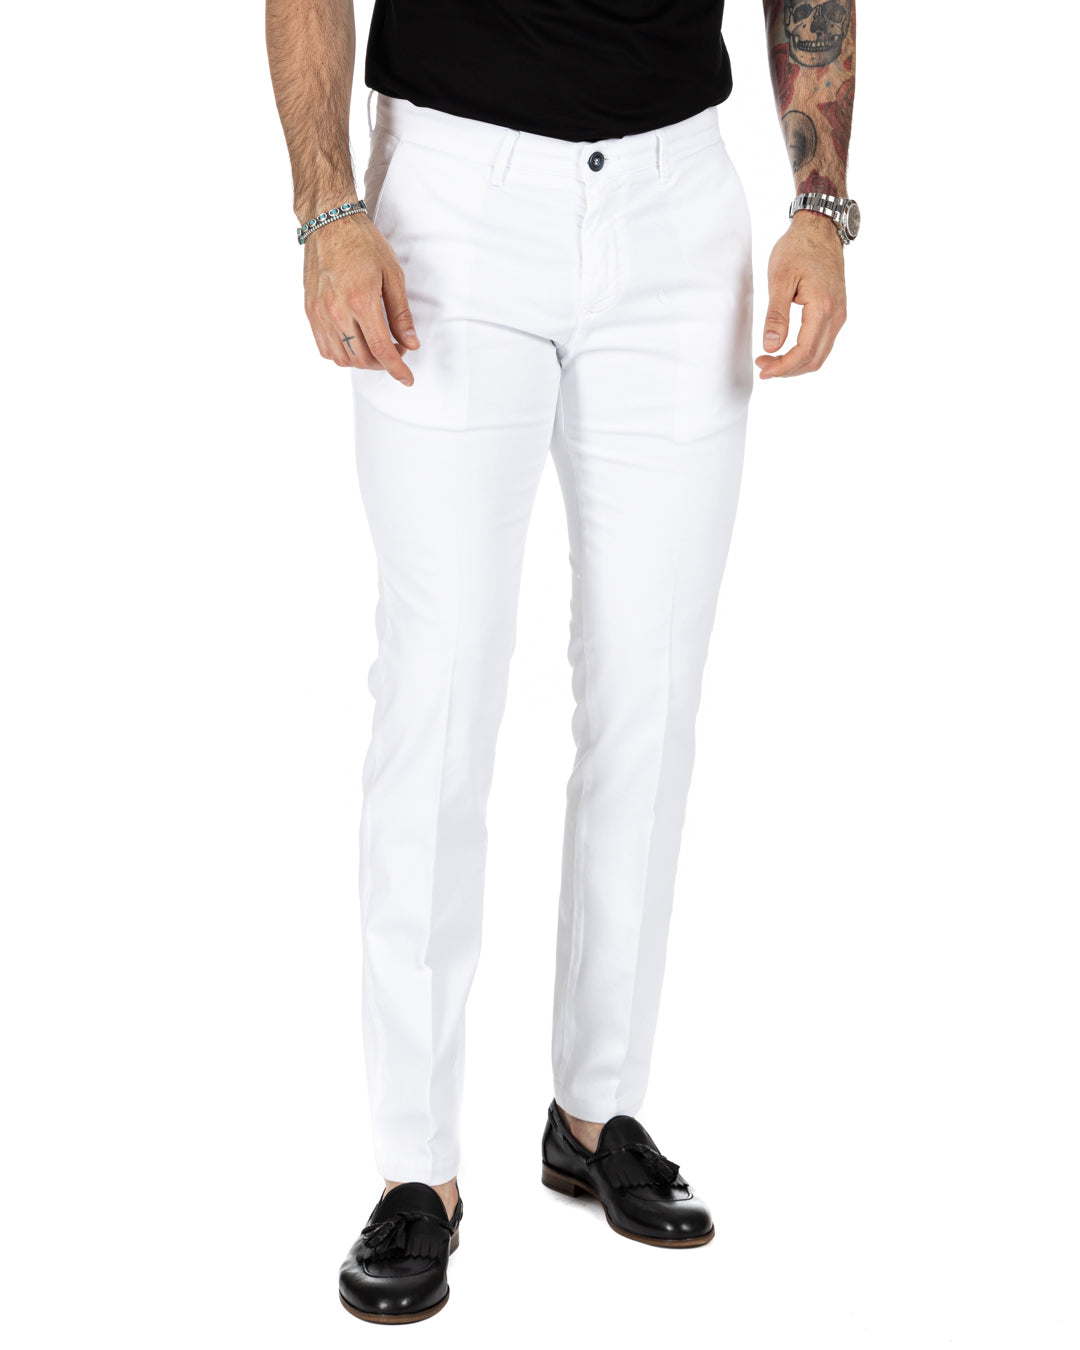 Bill - white armored trousers